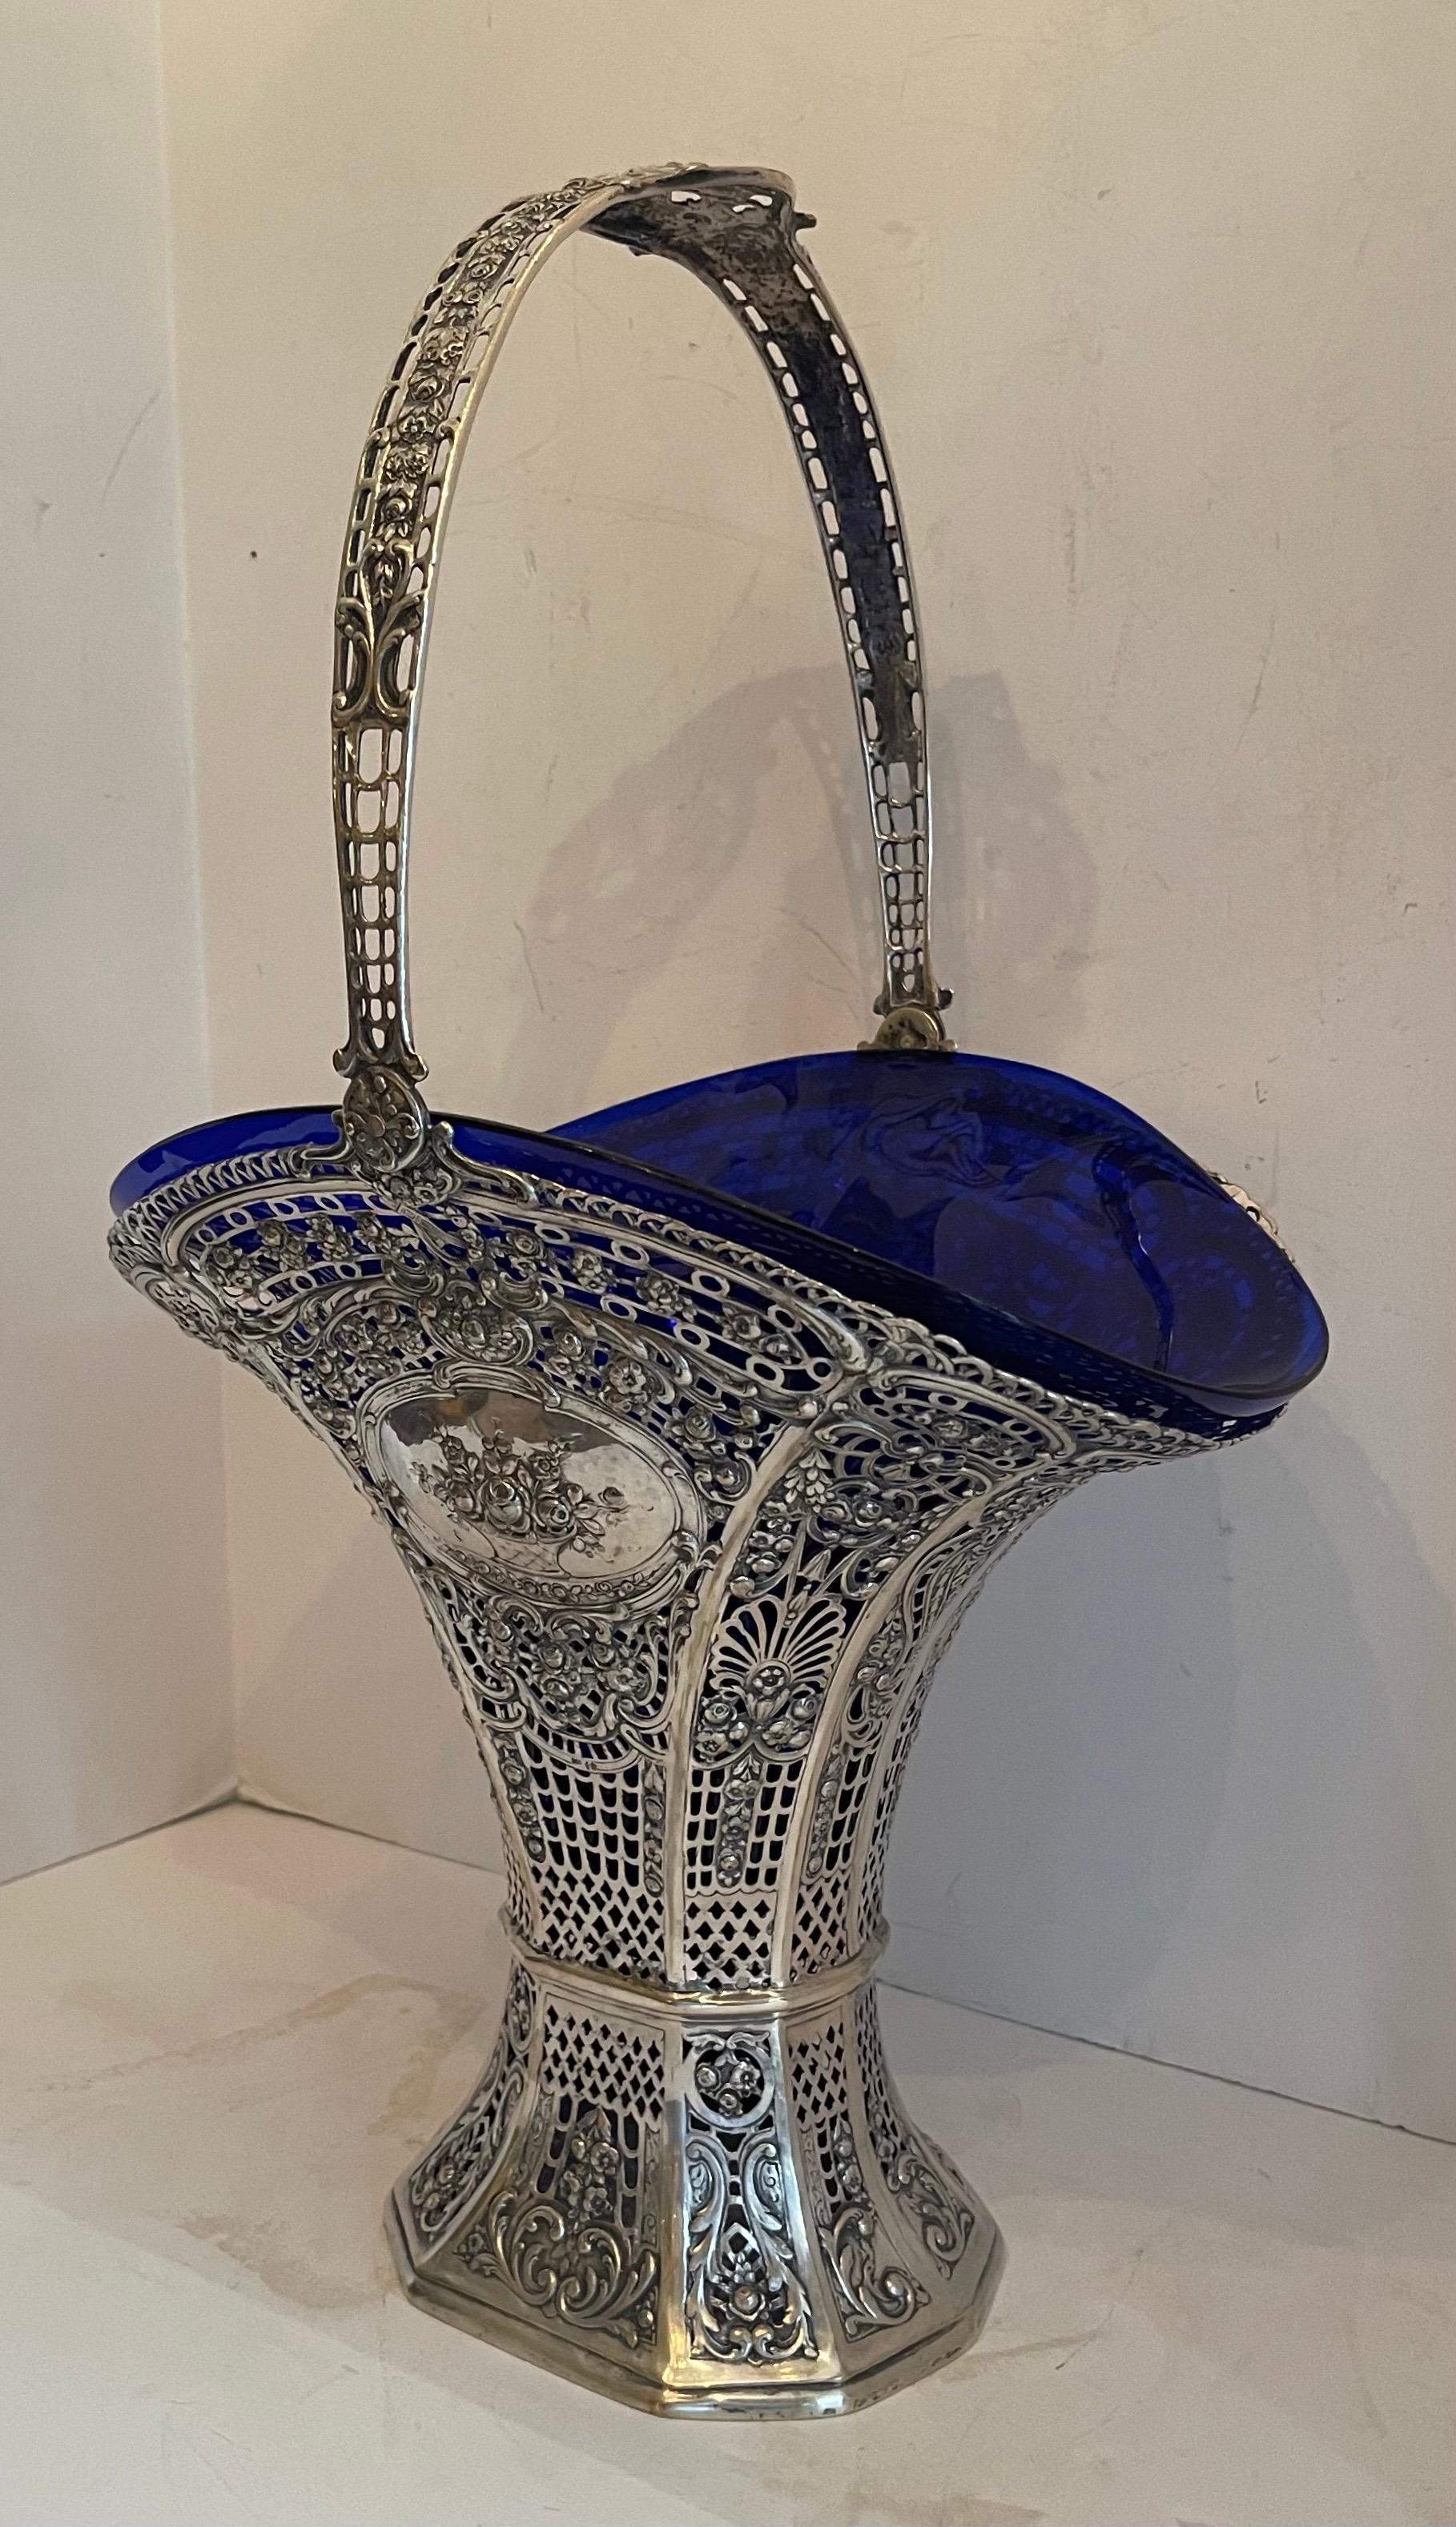 A rare and wonderful monumental large European sterling silver pierced bridal basket with open work handle inset with a beautiful cobalt blue glass.